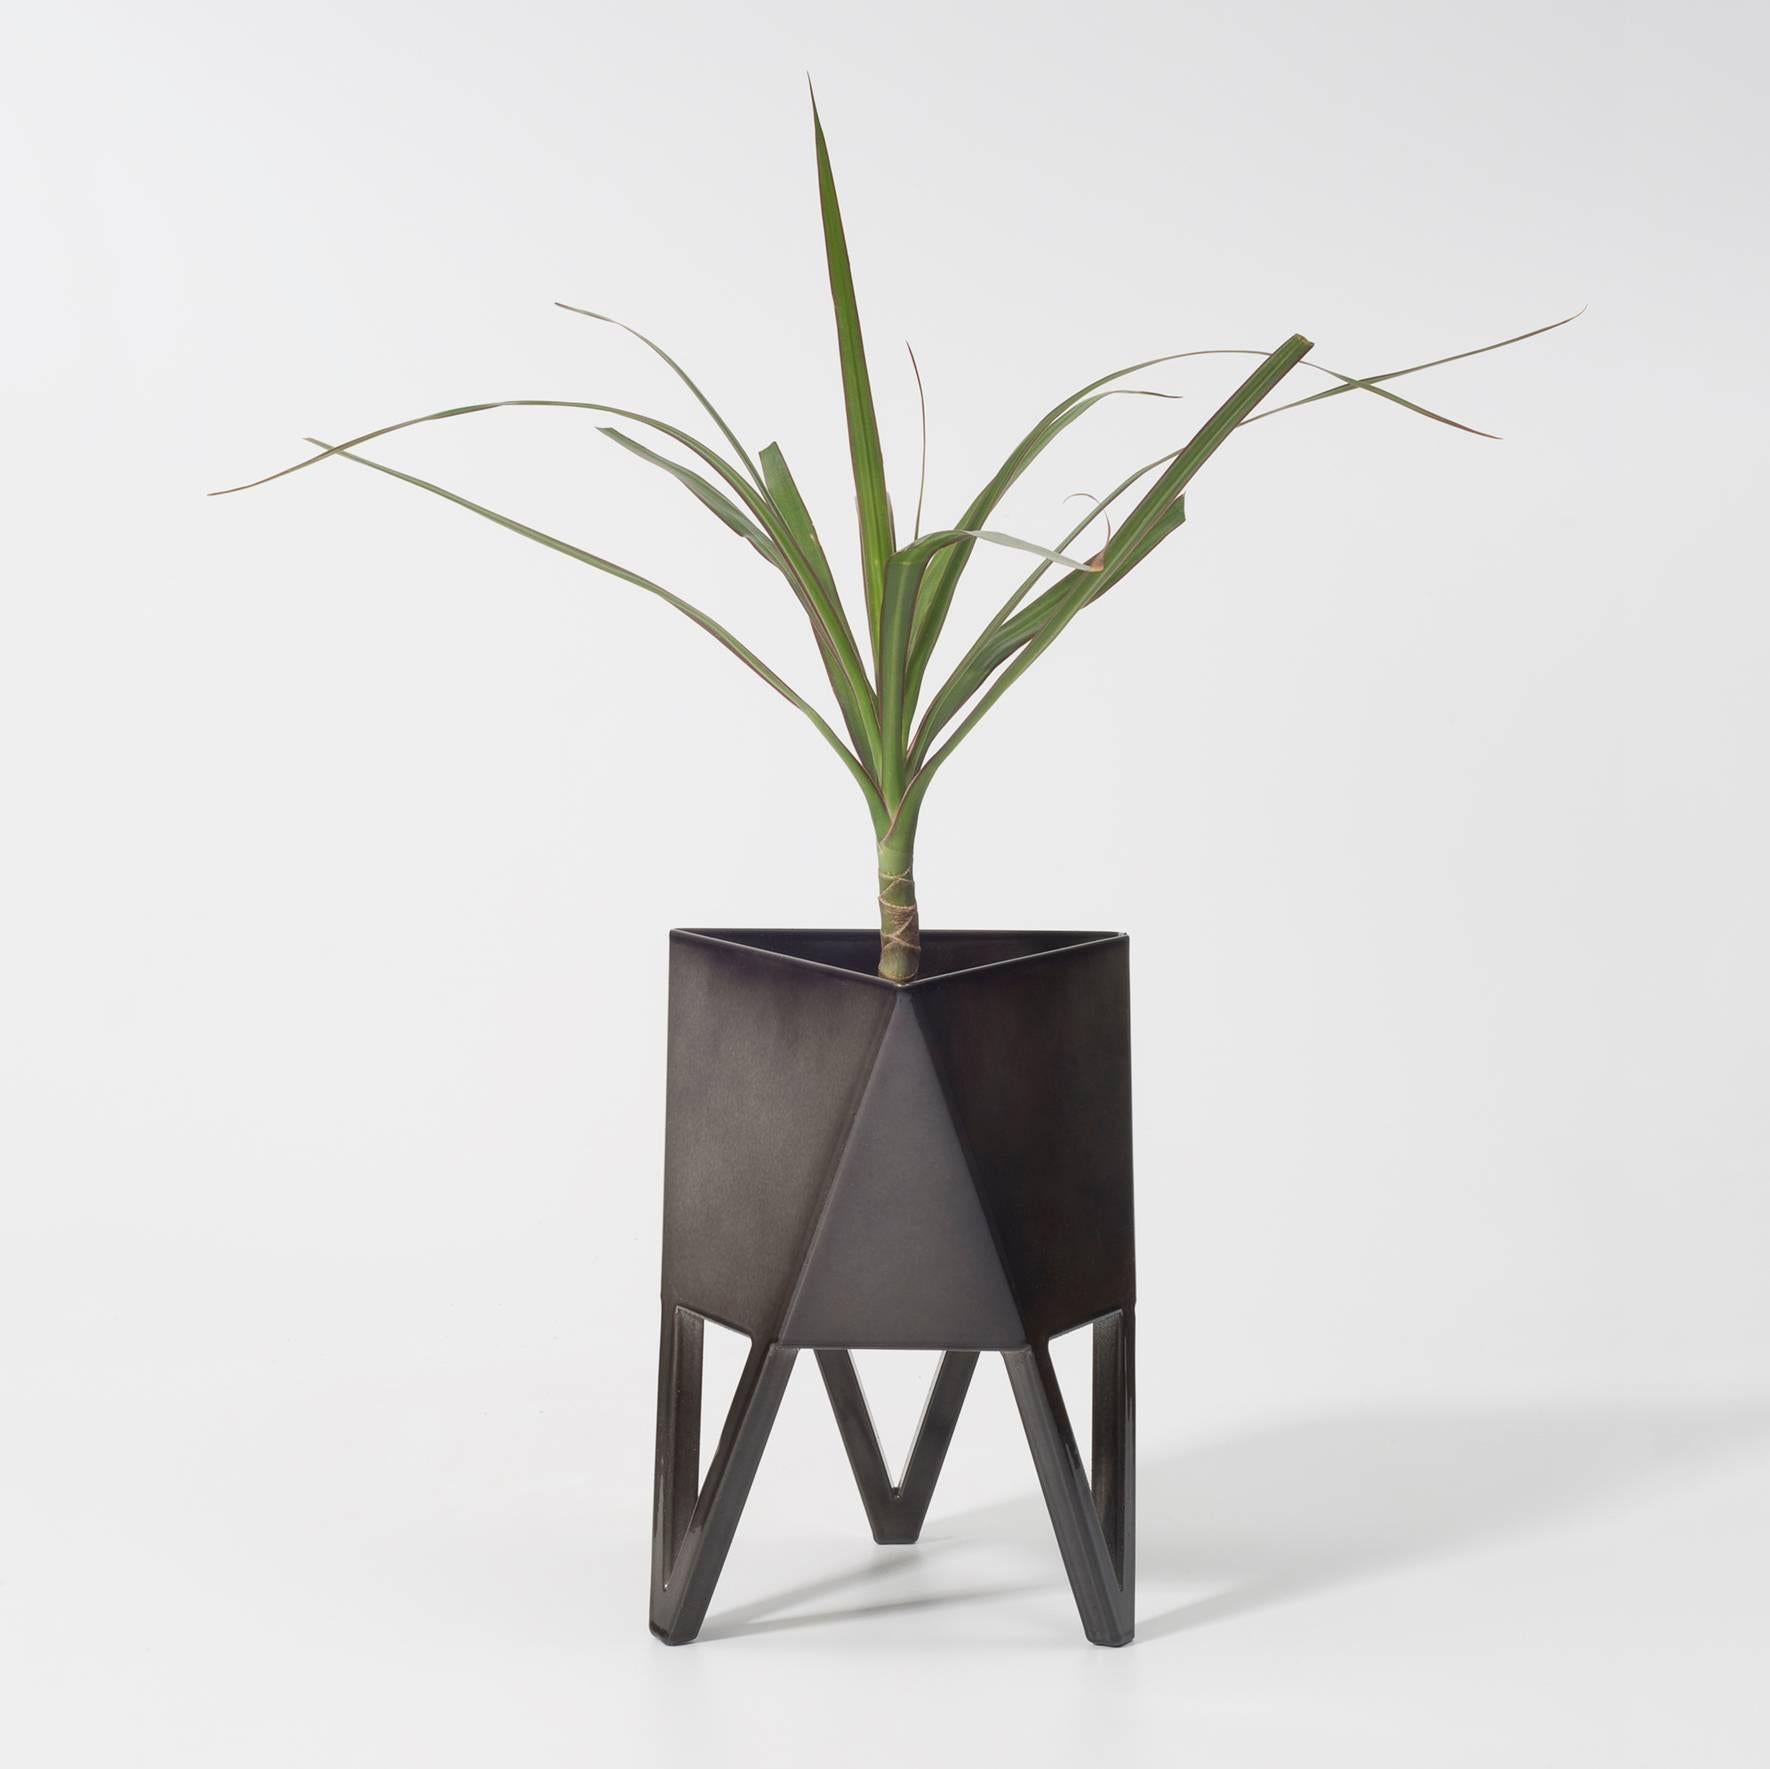 Deca Planter in Glossy Maroon Steel, Large, by Force/Collide 6